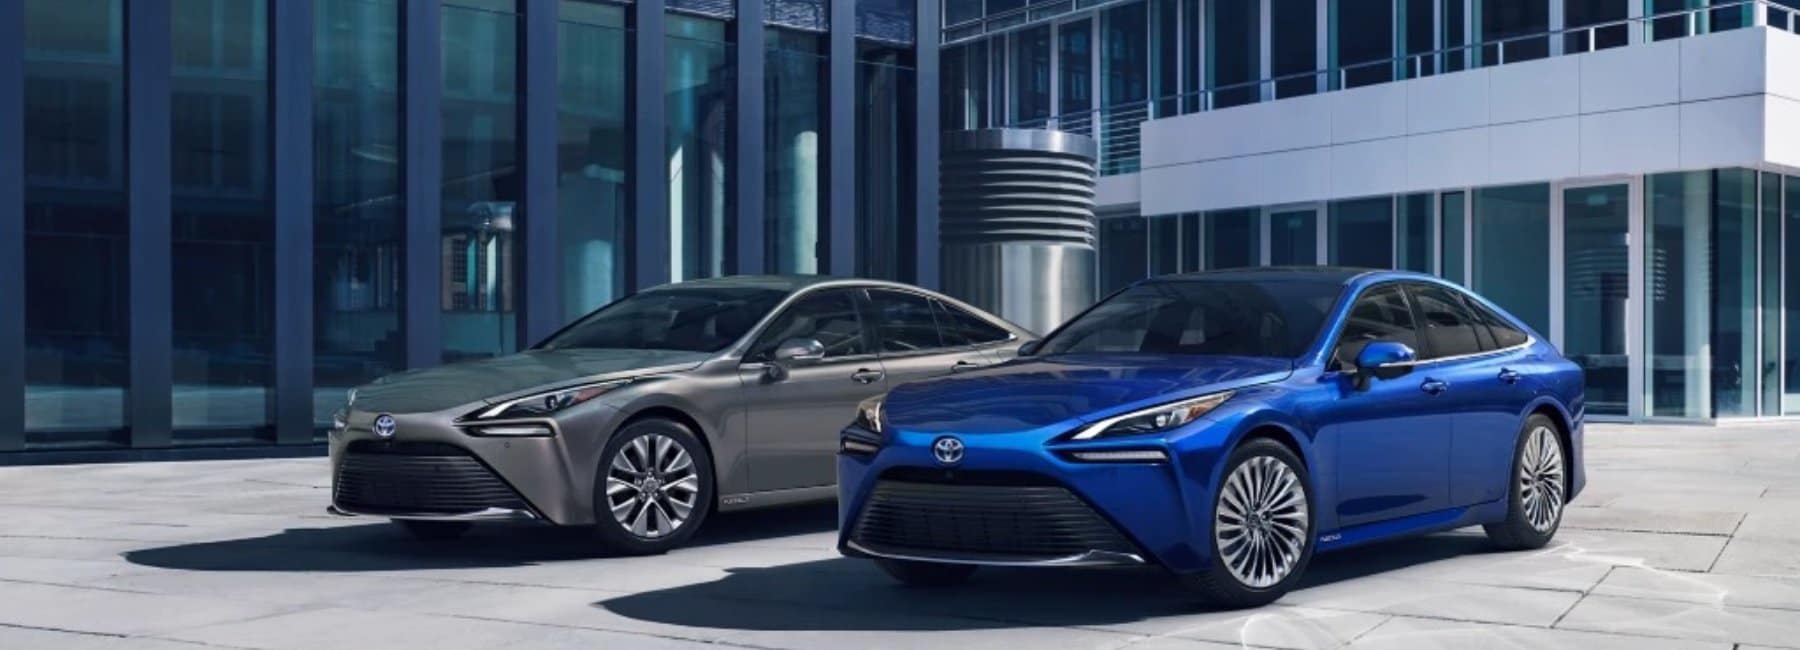 2022mirai-hero-2cars-front-angleview-glass-buildings-blue_grey